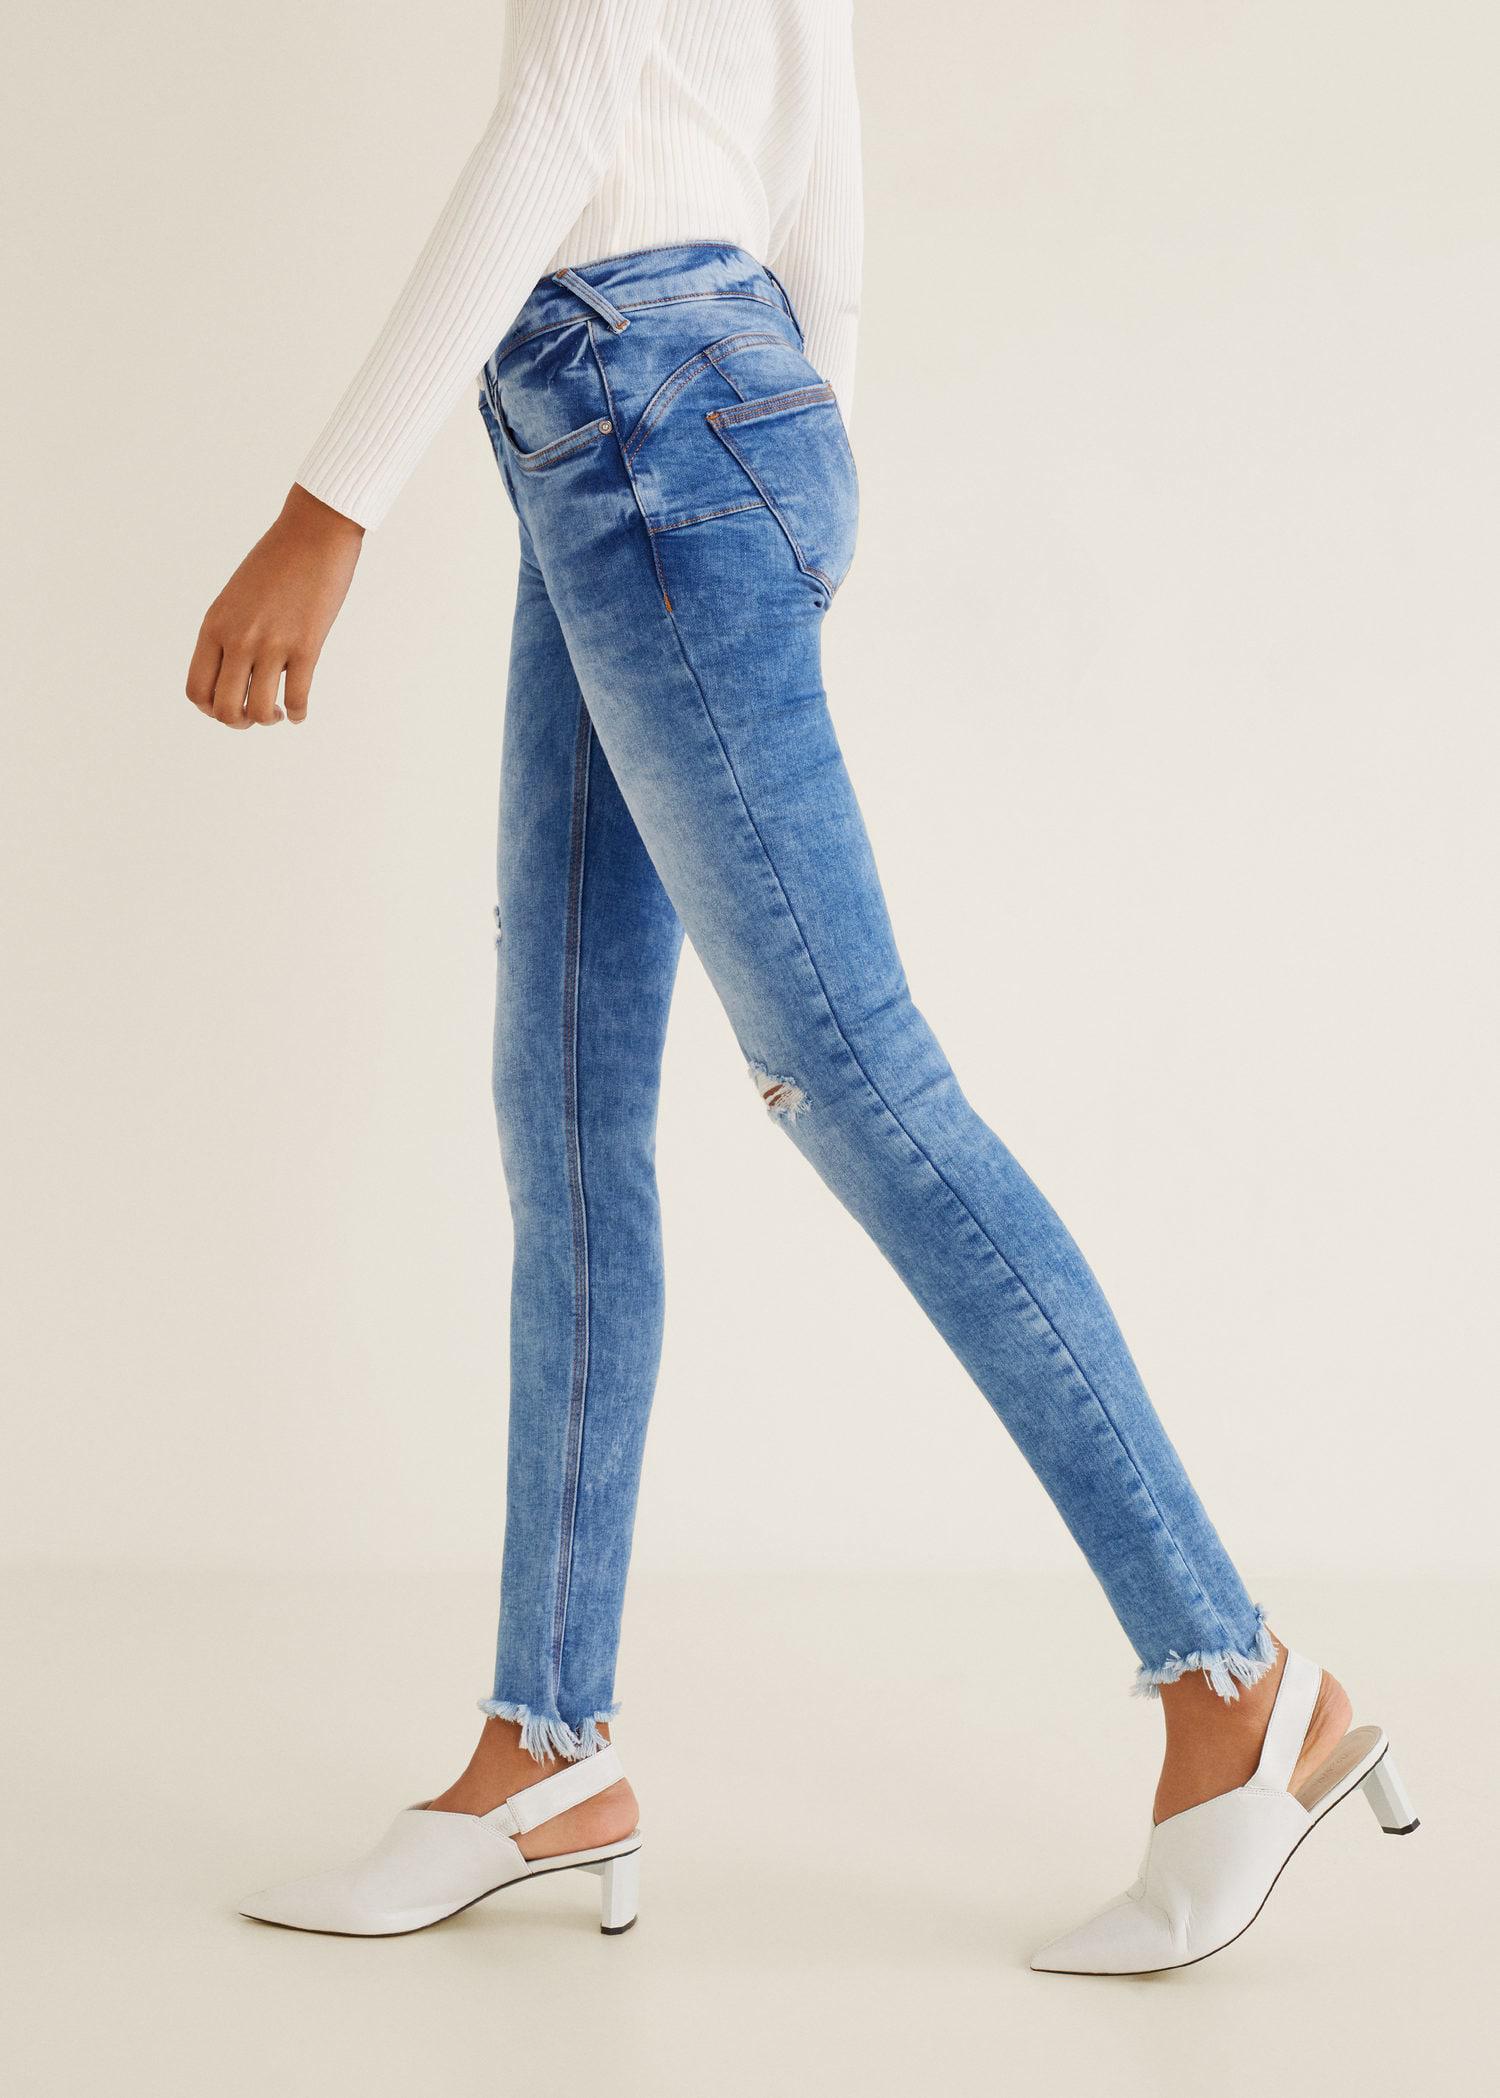 Kim Mango Jeans Hotsell, SAVE 49% - hma-to.med.br